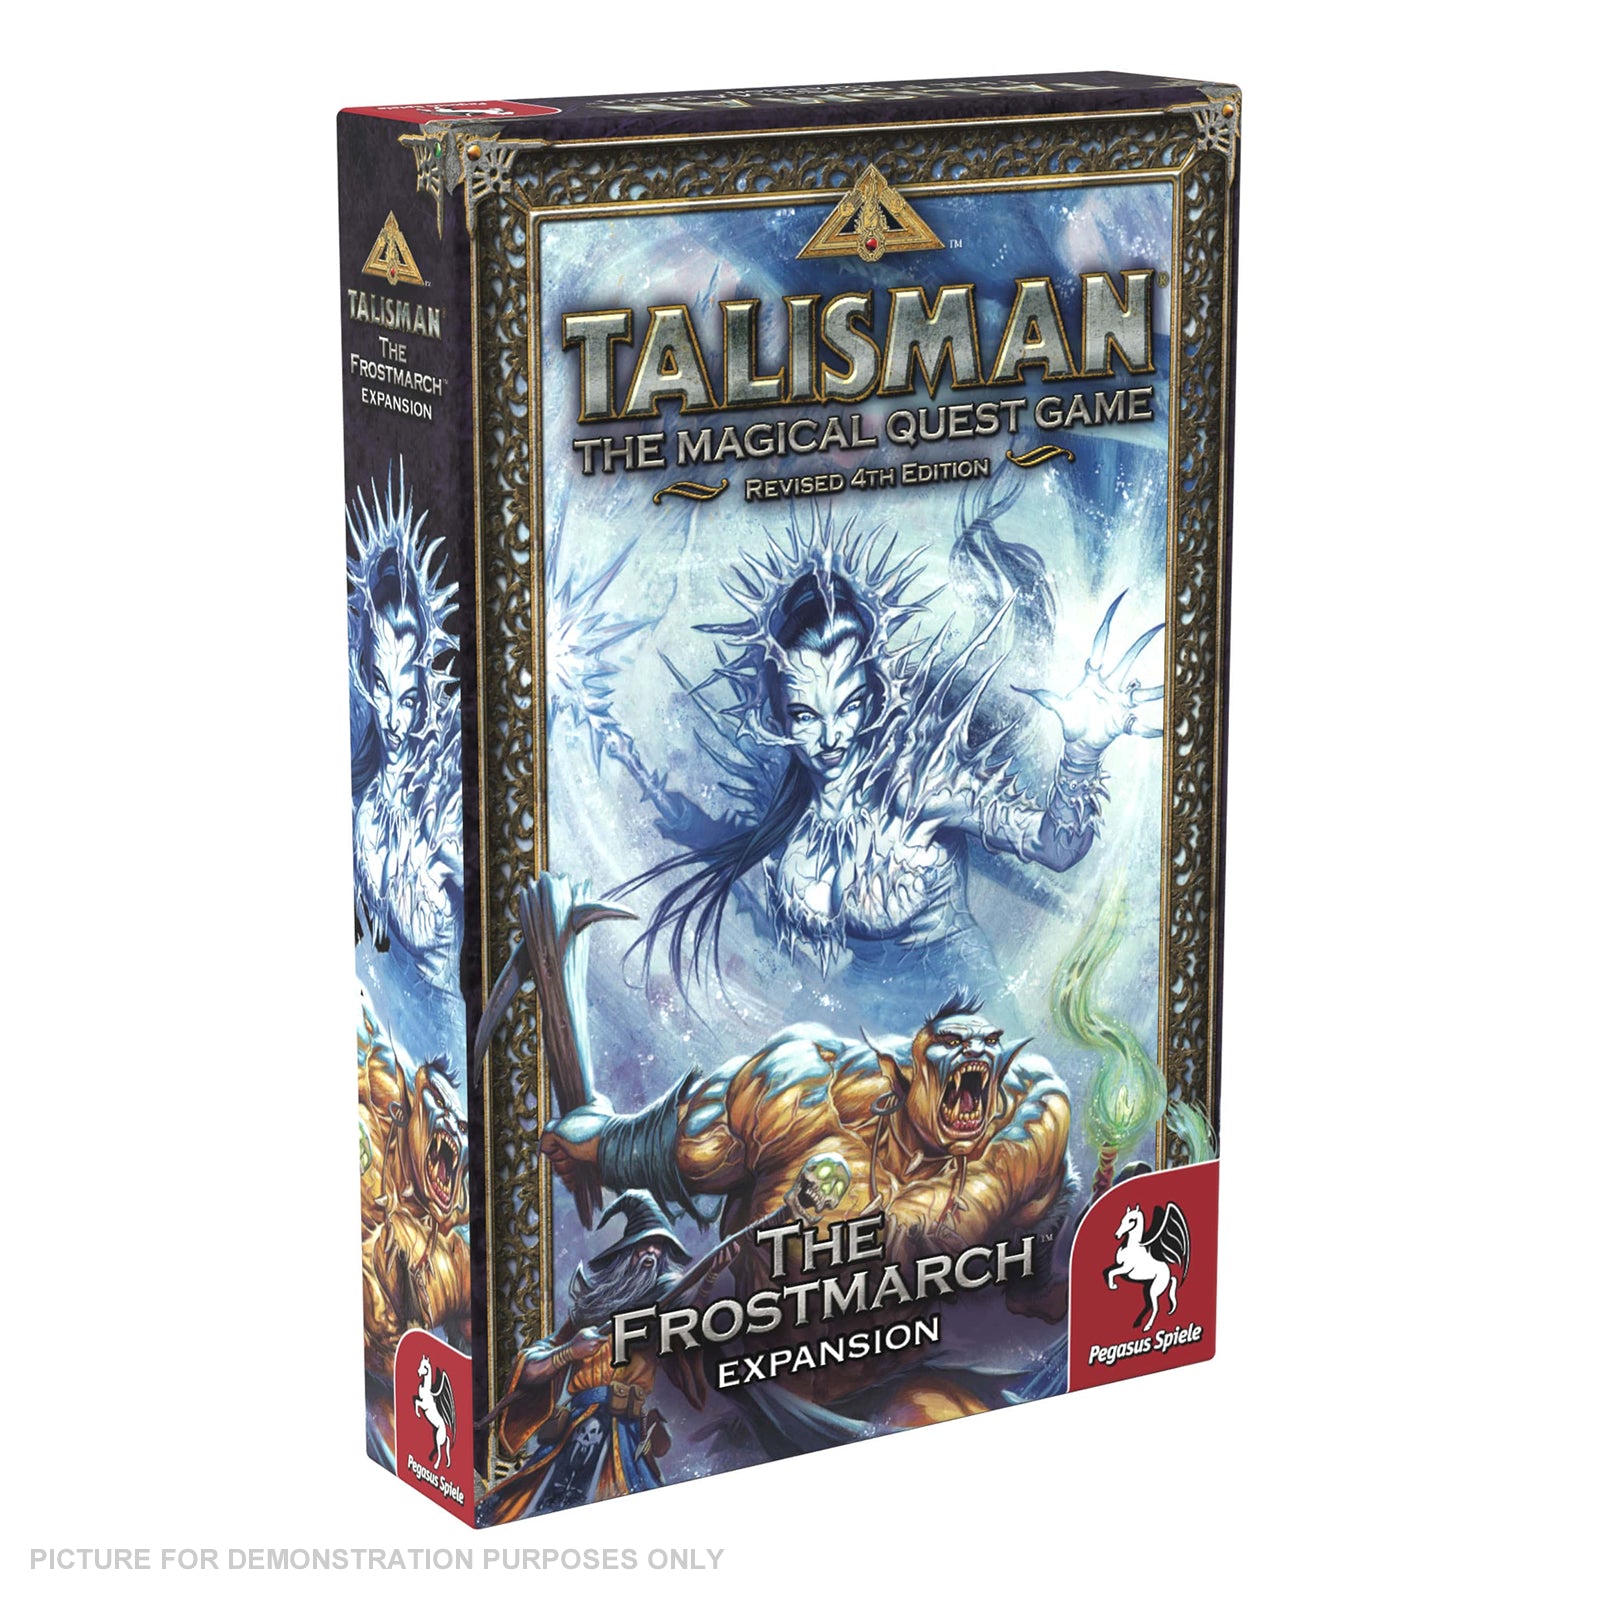 Talisman 4th Edition - THE FROSTMARCH Expansion